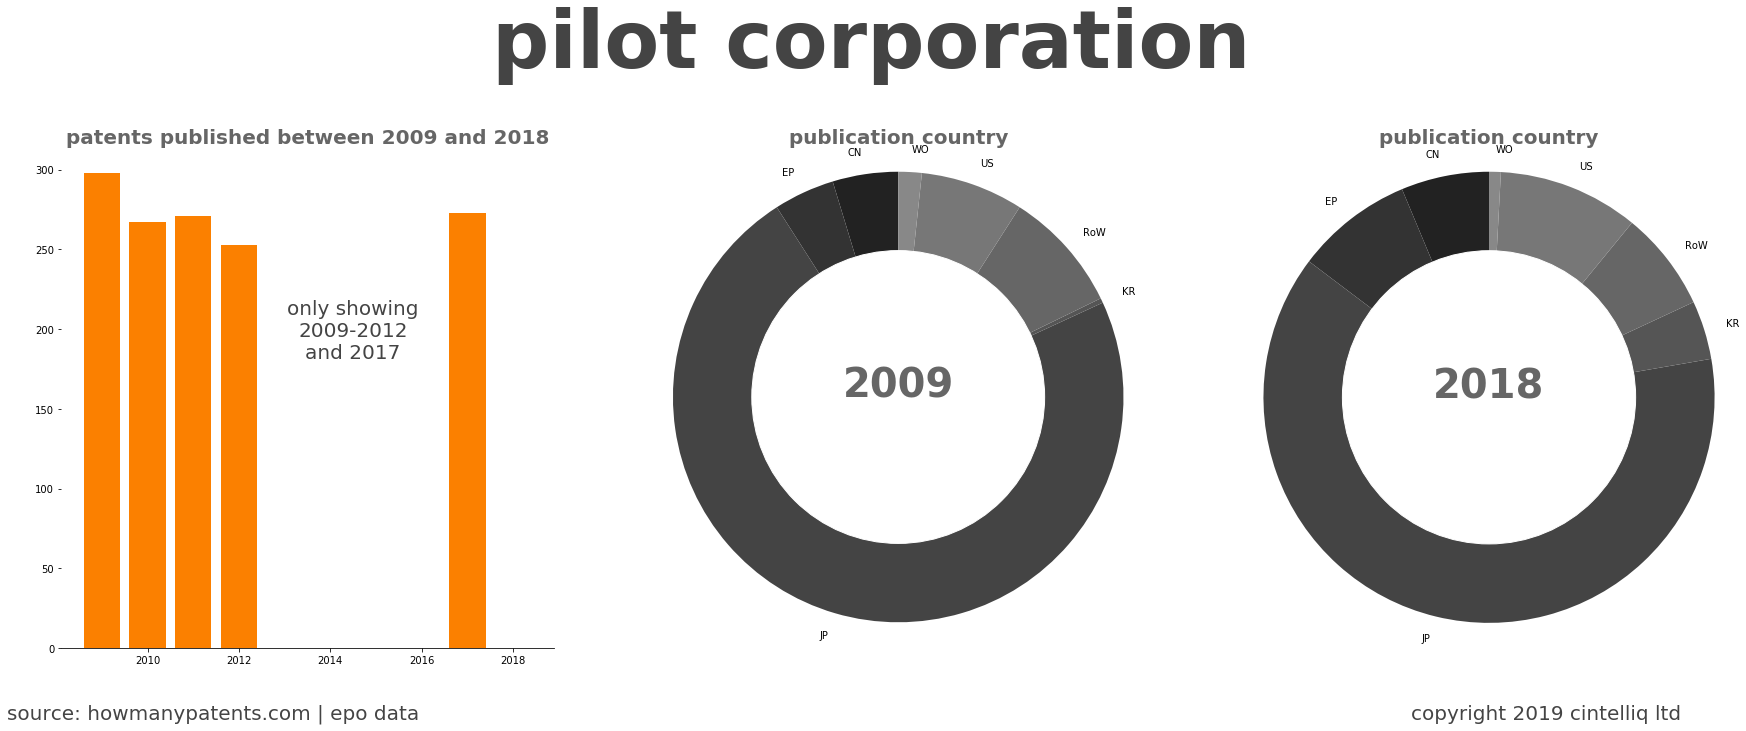 summary of patents for Pilot Corporation